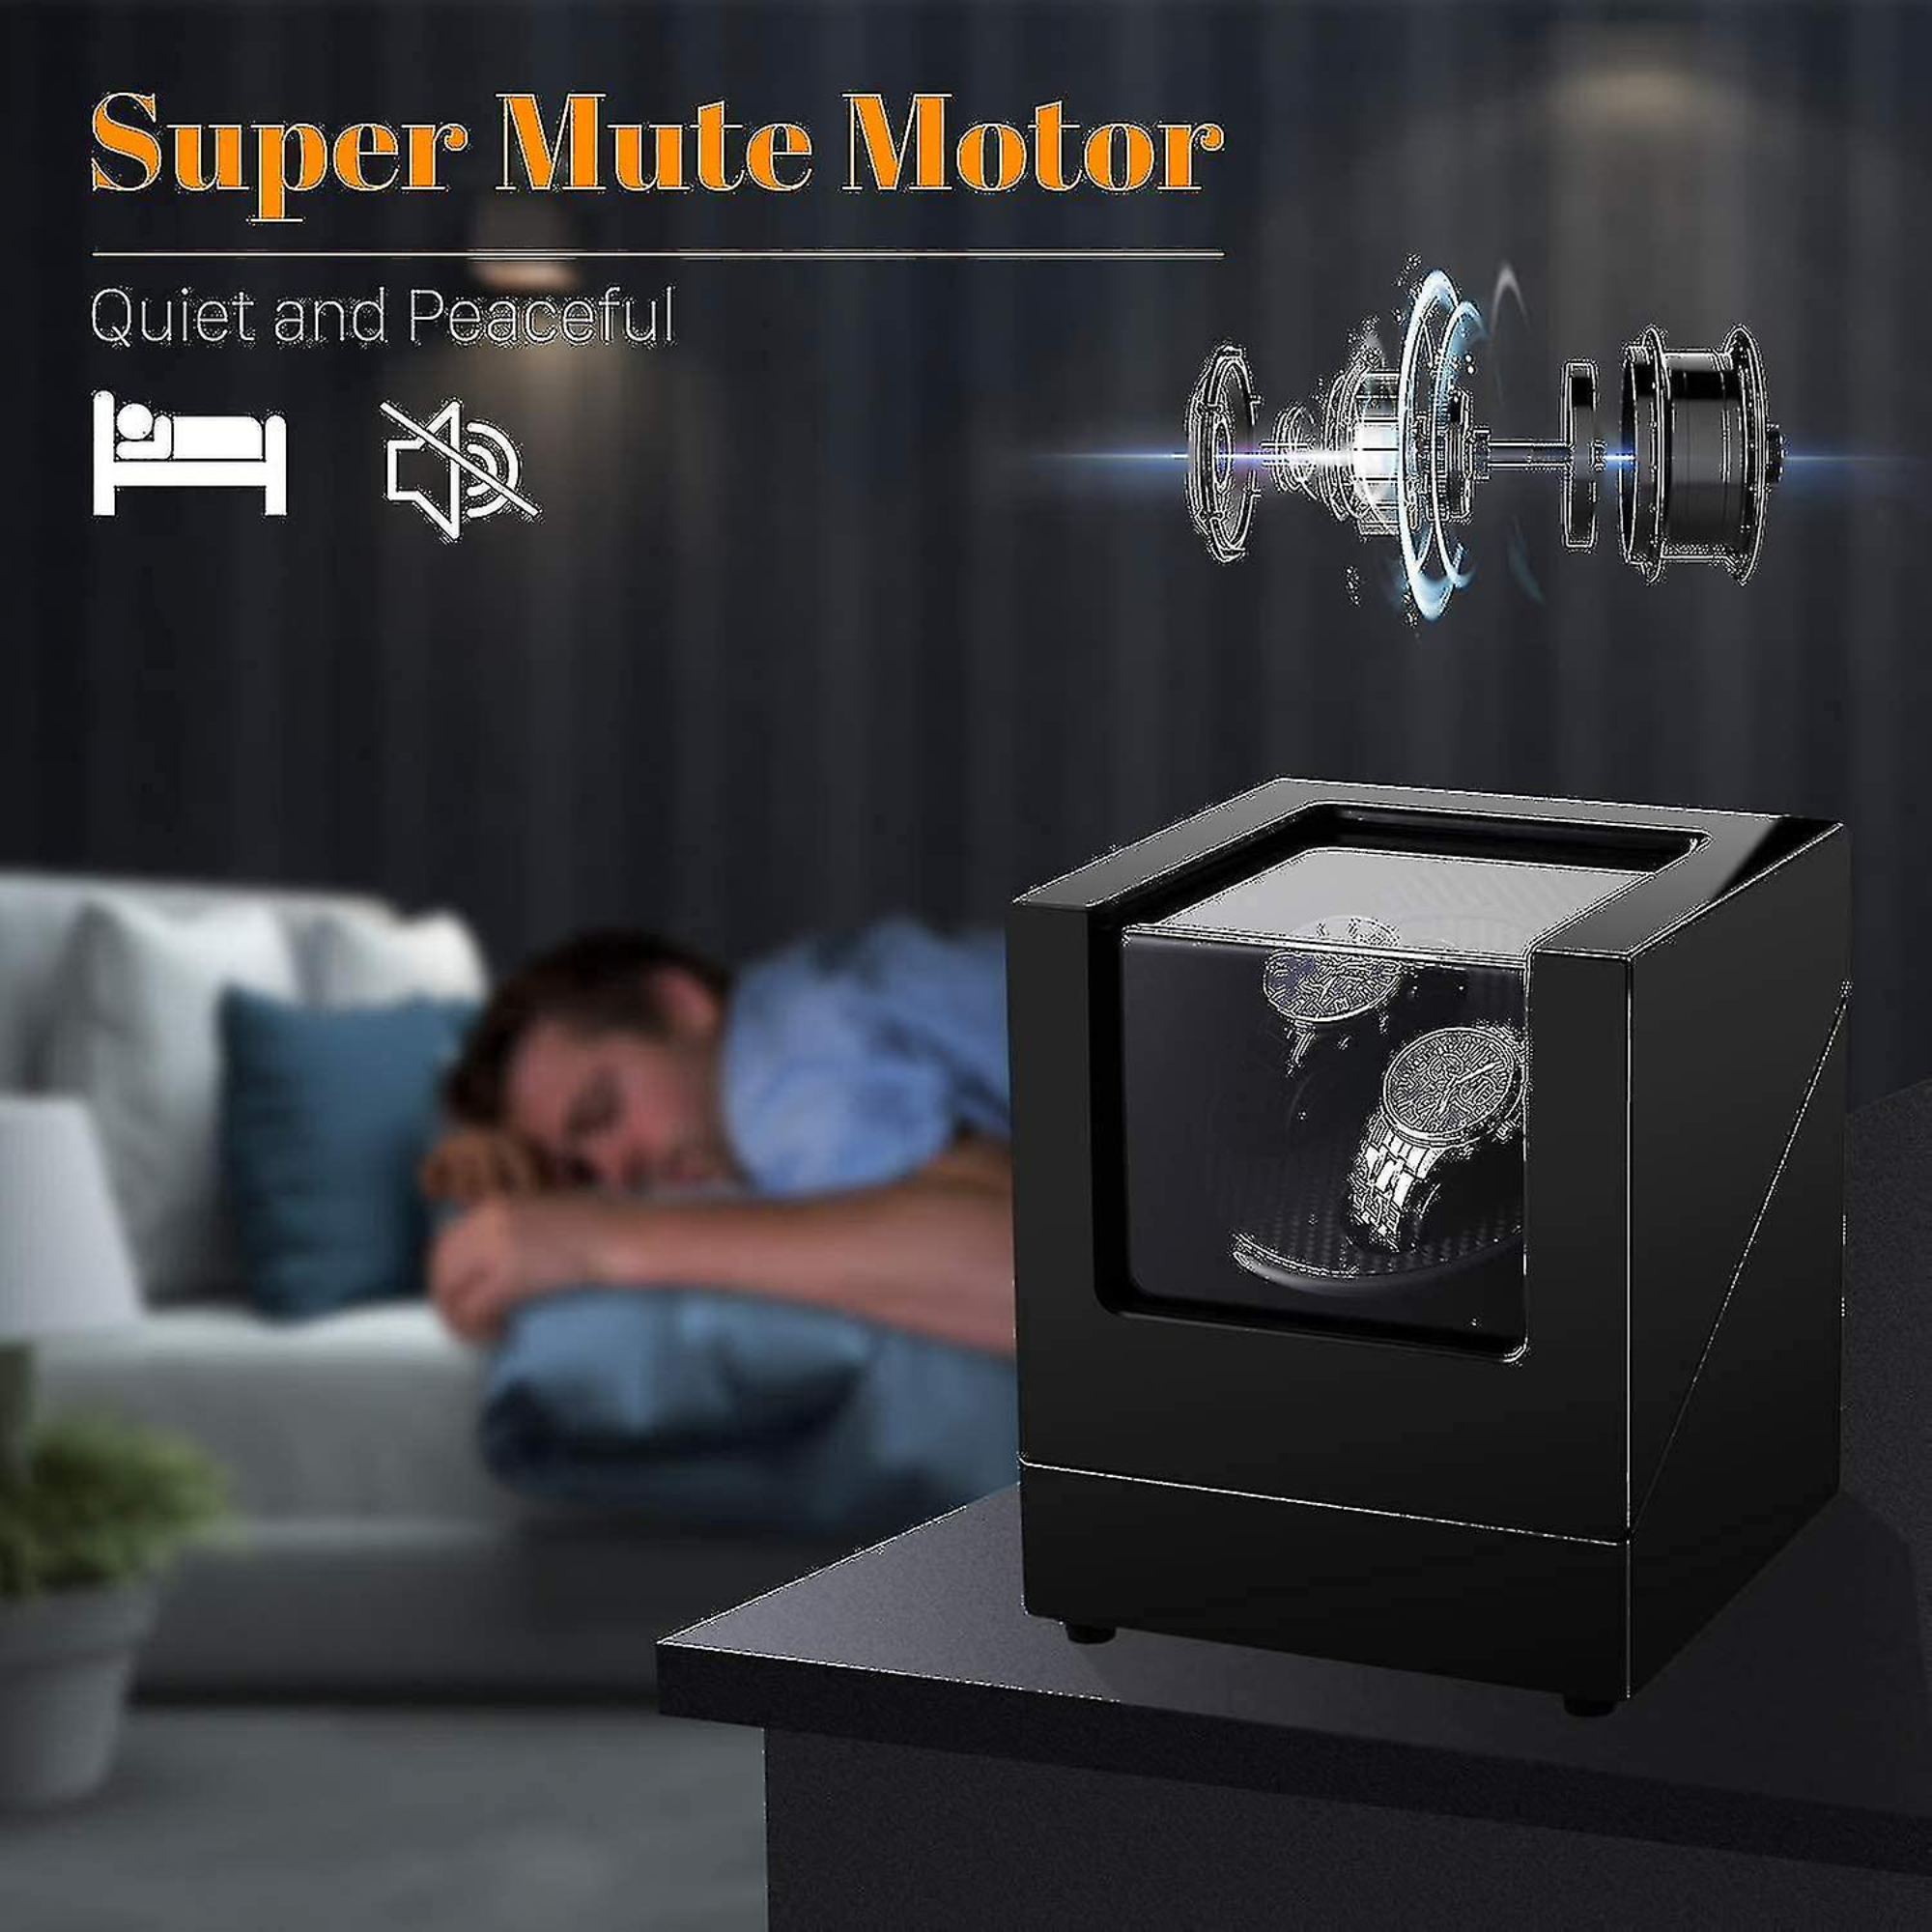 Automatic Double Watch Winder Box Luxurious Wooden Shell Piano Paint Exterior & Silent Wrist Watch Motor: Black-Carbon Fiber